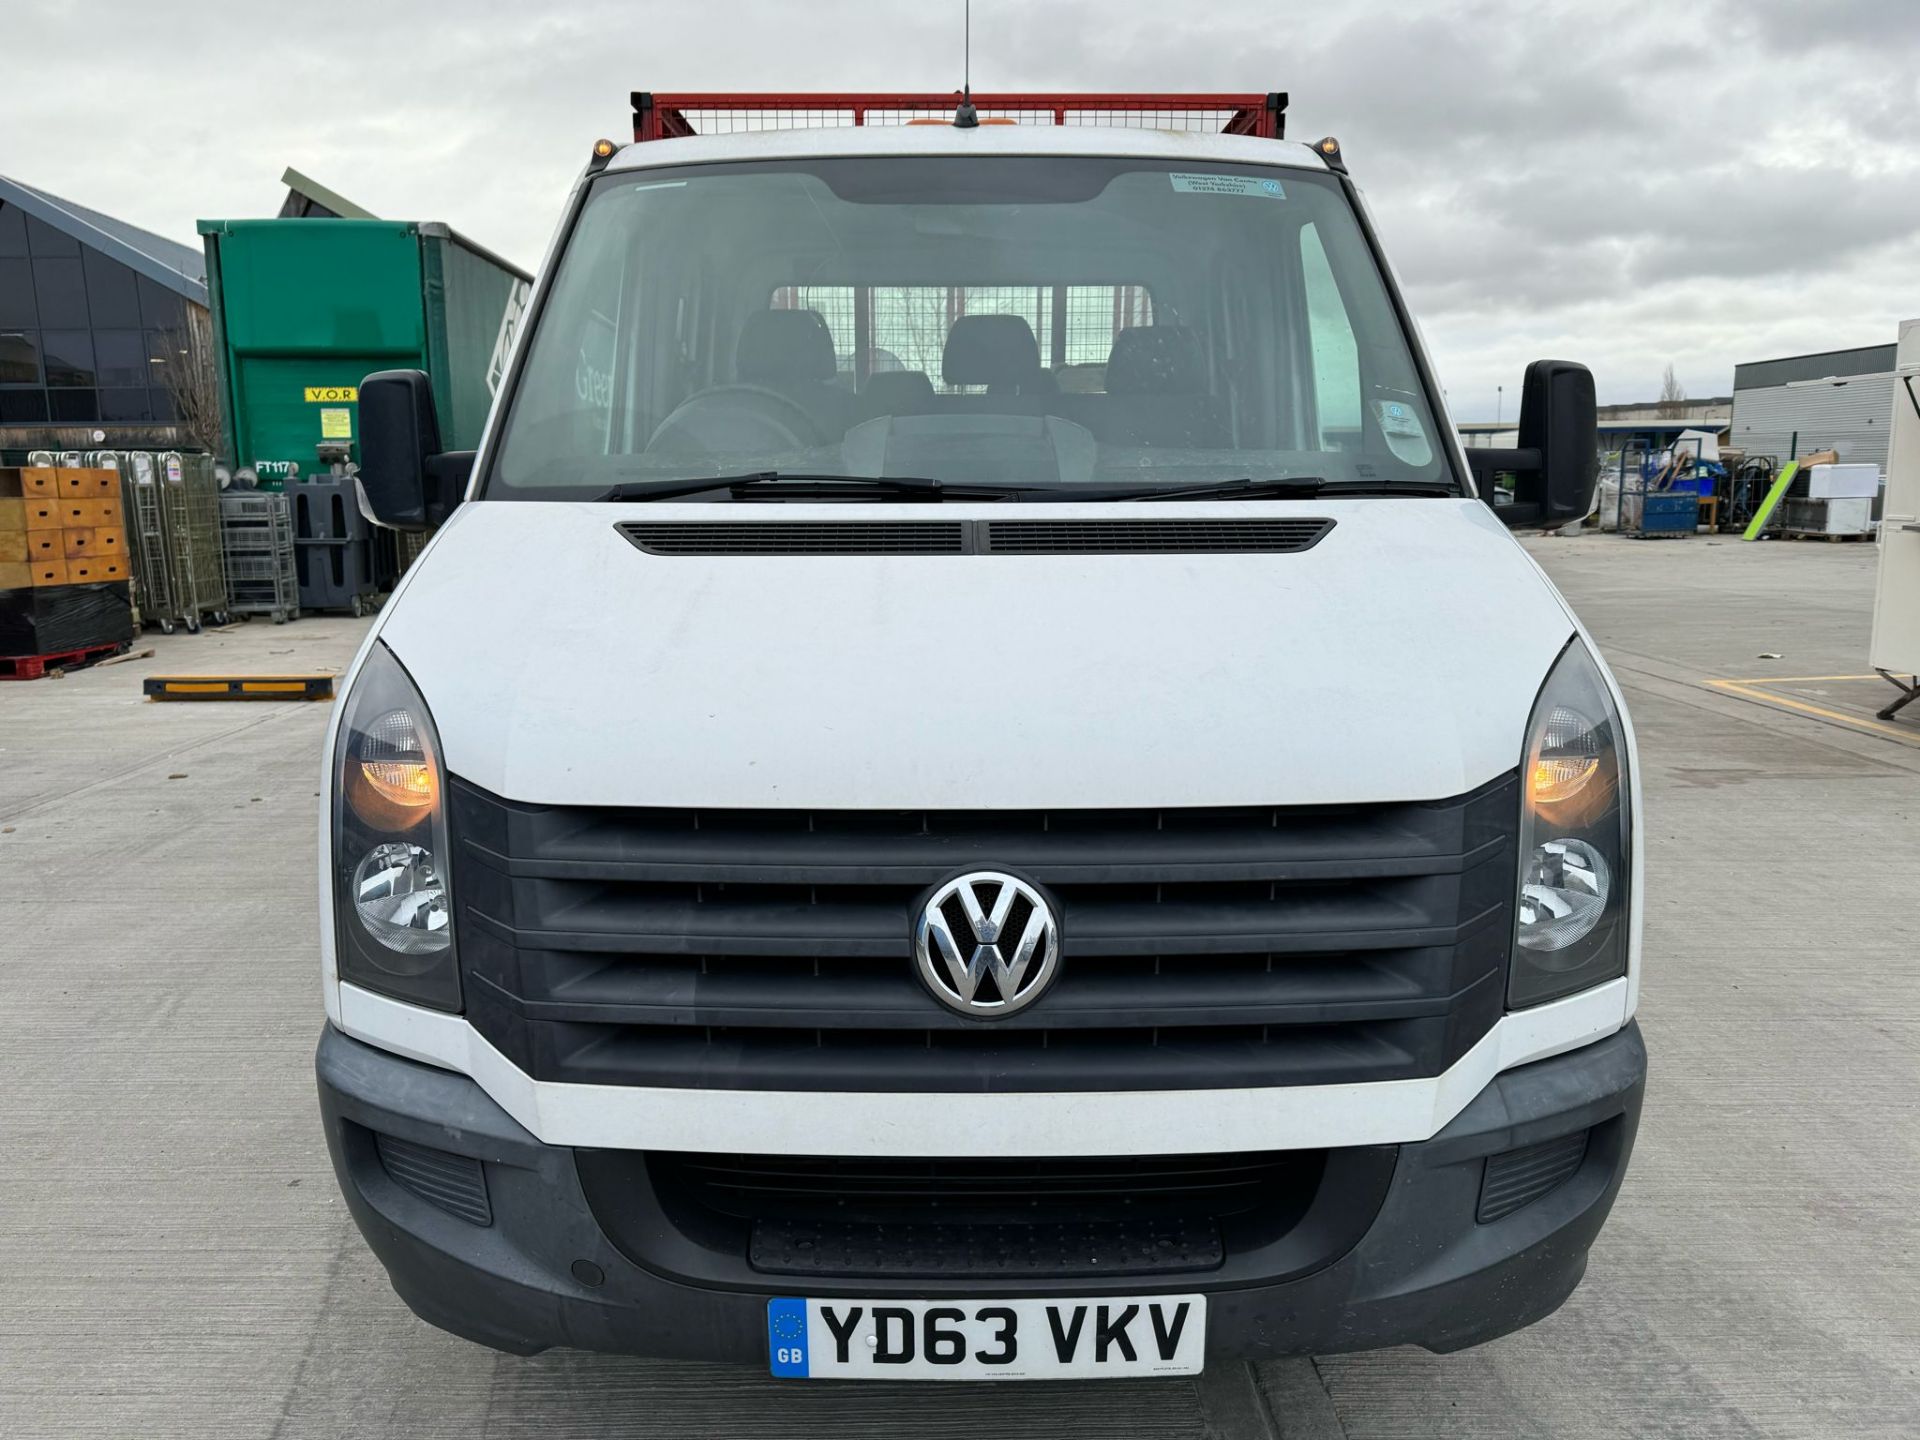 2013, VOLKSWAGEN Crafter CR50 Startline TDI, HGV Caged Tipper Van (Ex-Council Owned & Maintained) - Bild 4 aus 42